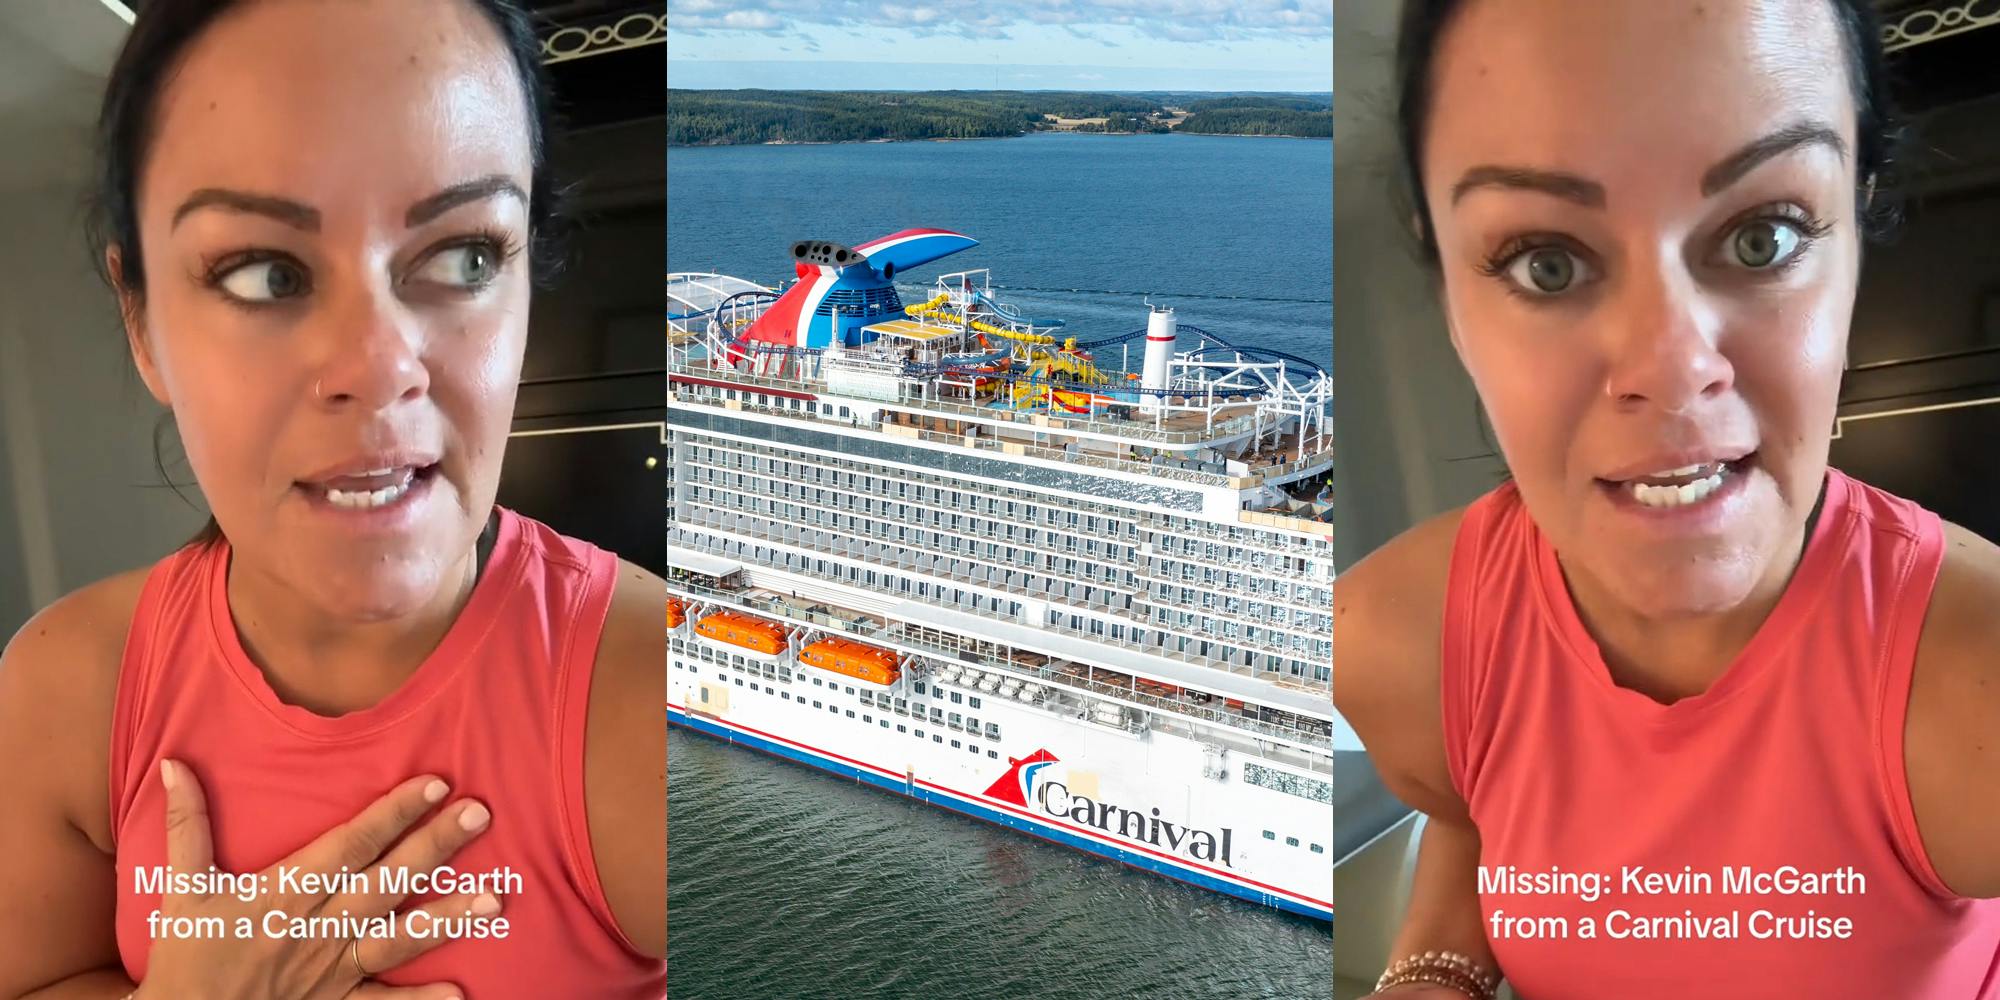 Carnival cruise passenger speaking with caption "Missing: Kevin McGarth from a Carnival Cruise" (l) Carnival Cruise ship (c) Carnival cruise passenger speaking with caption "Missing: Kevin McGarth from a Carnival Cruise" (r)